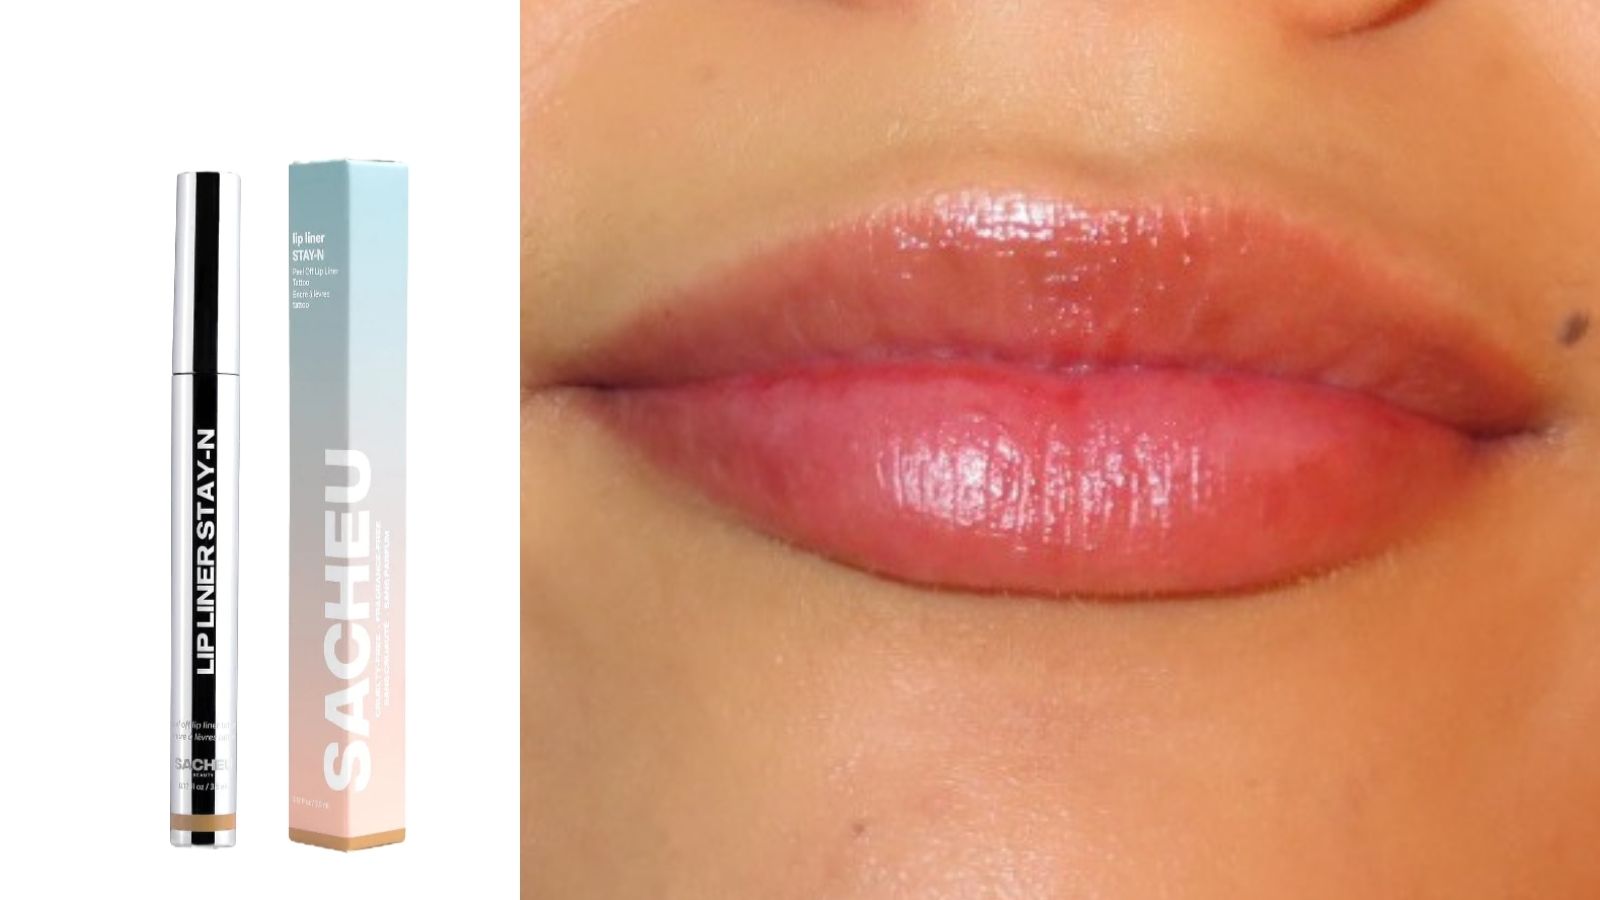 Meet the Lip Stain That’s Supposed to Peel Off